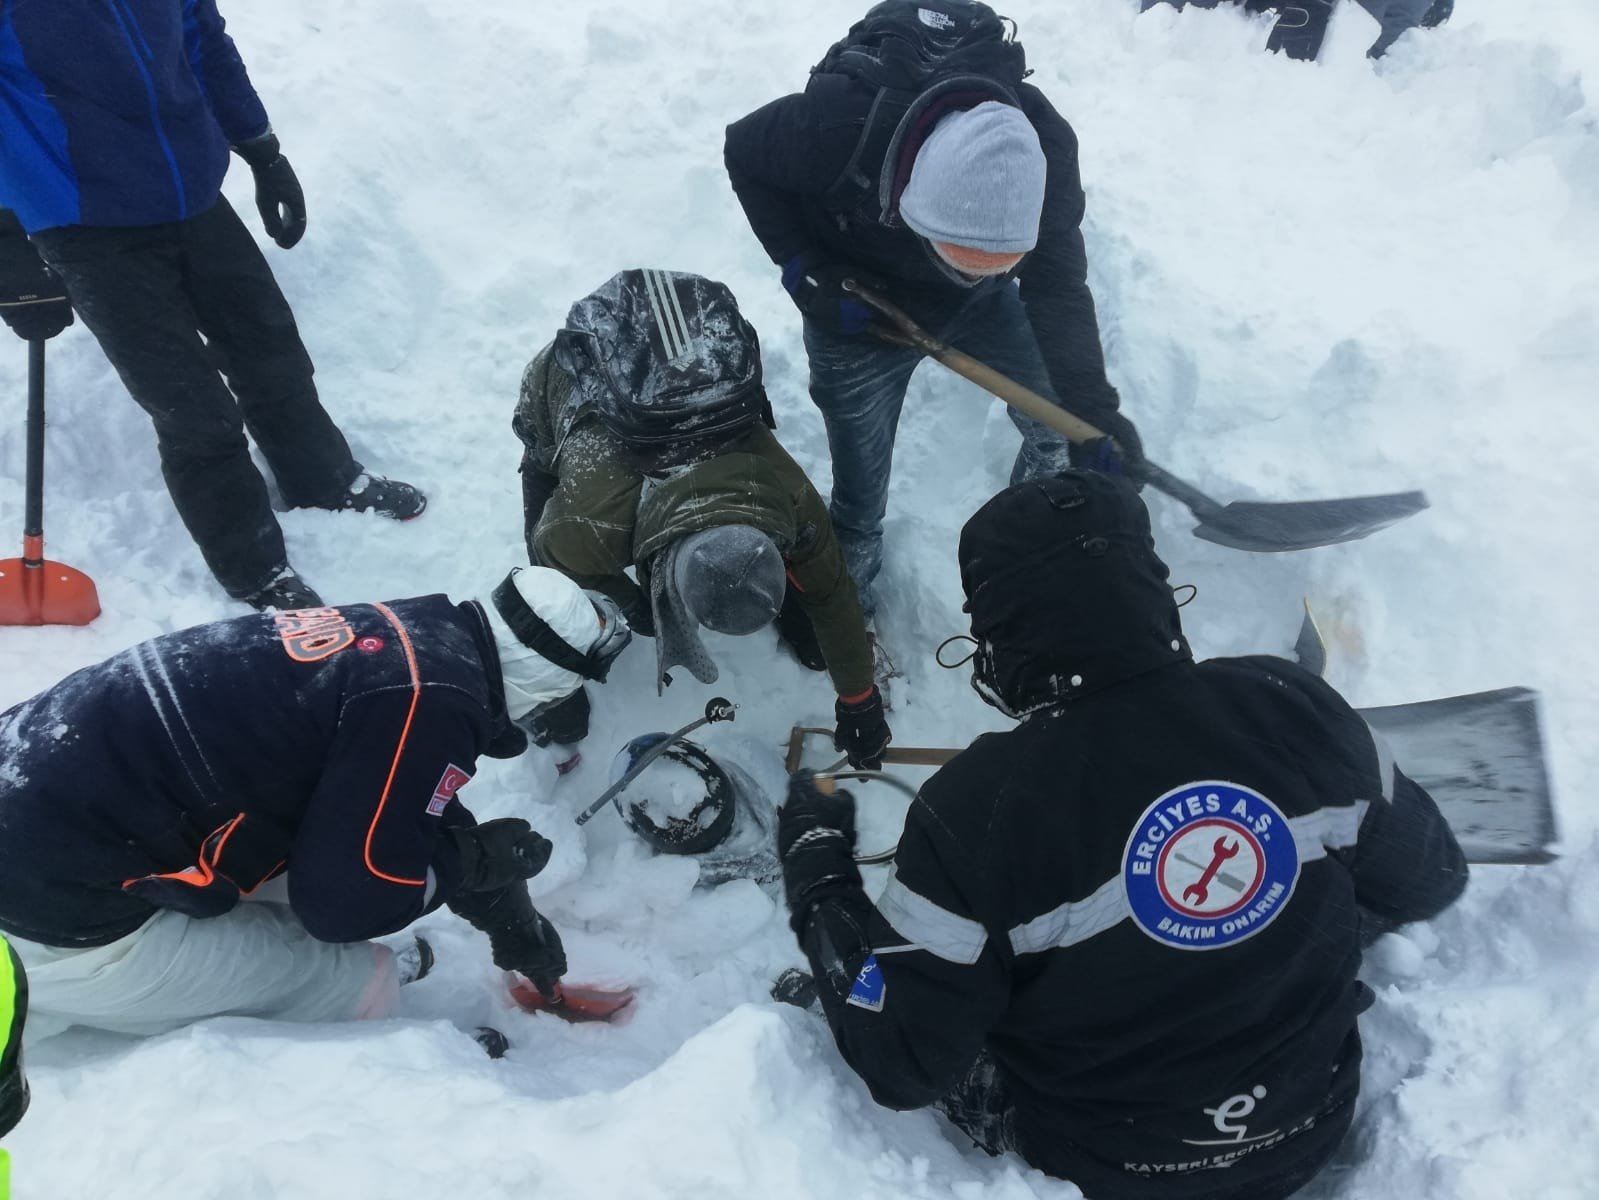 Rescuers saving a man buried in snow